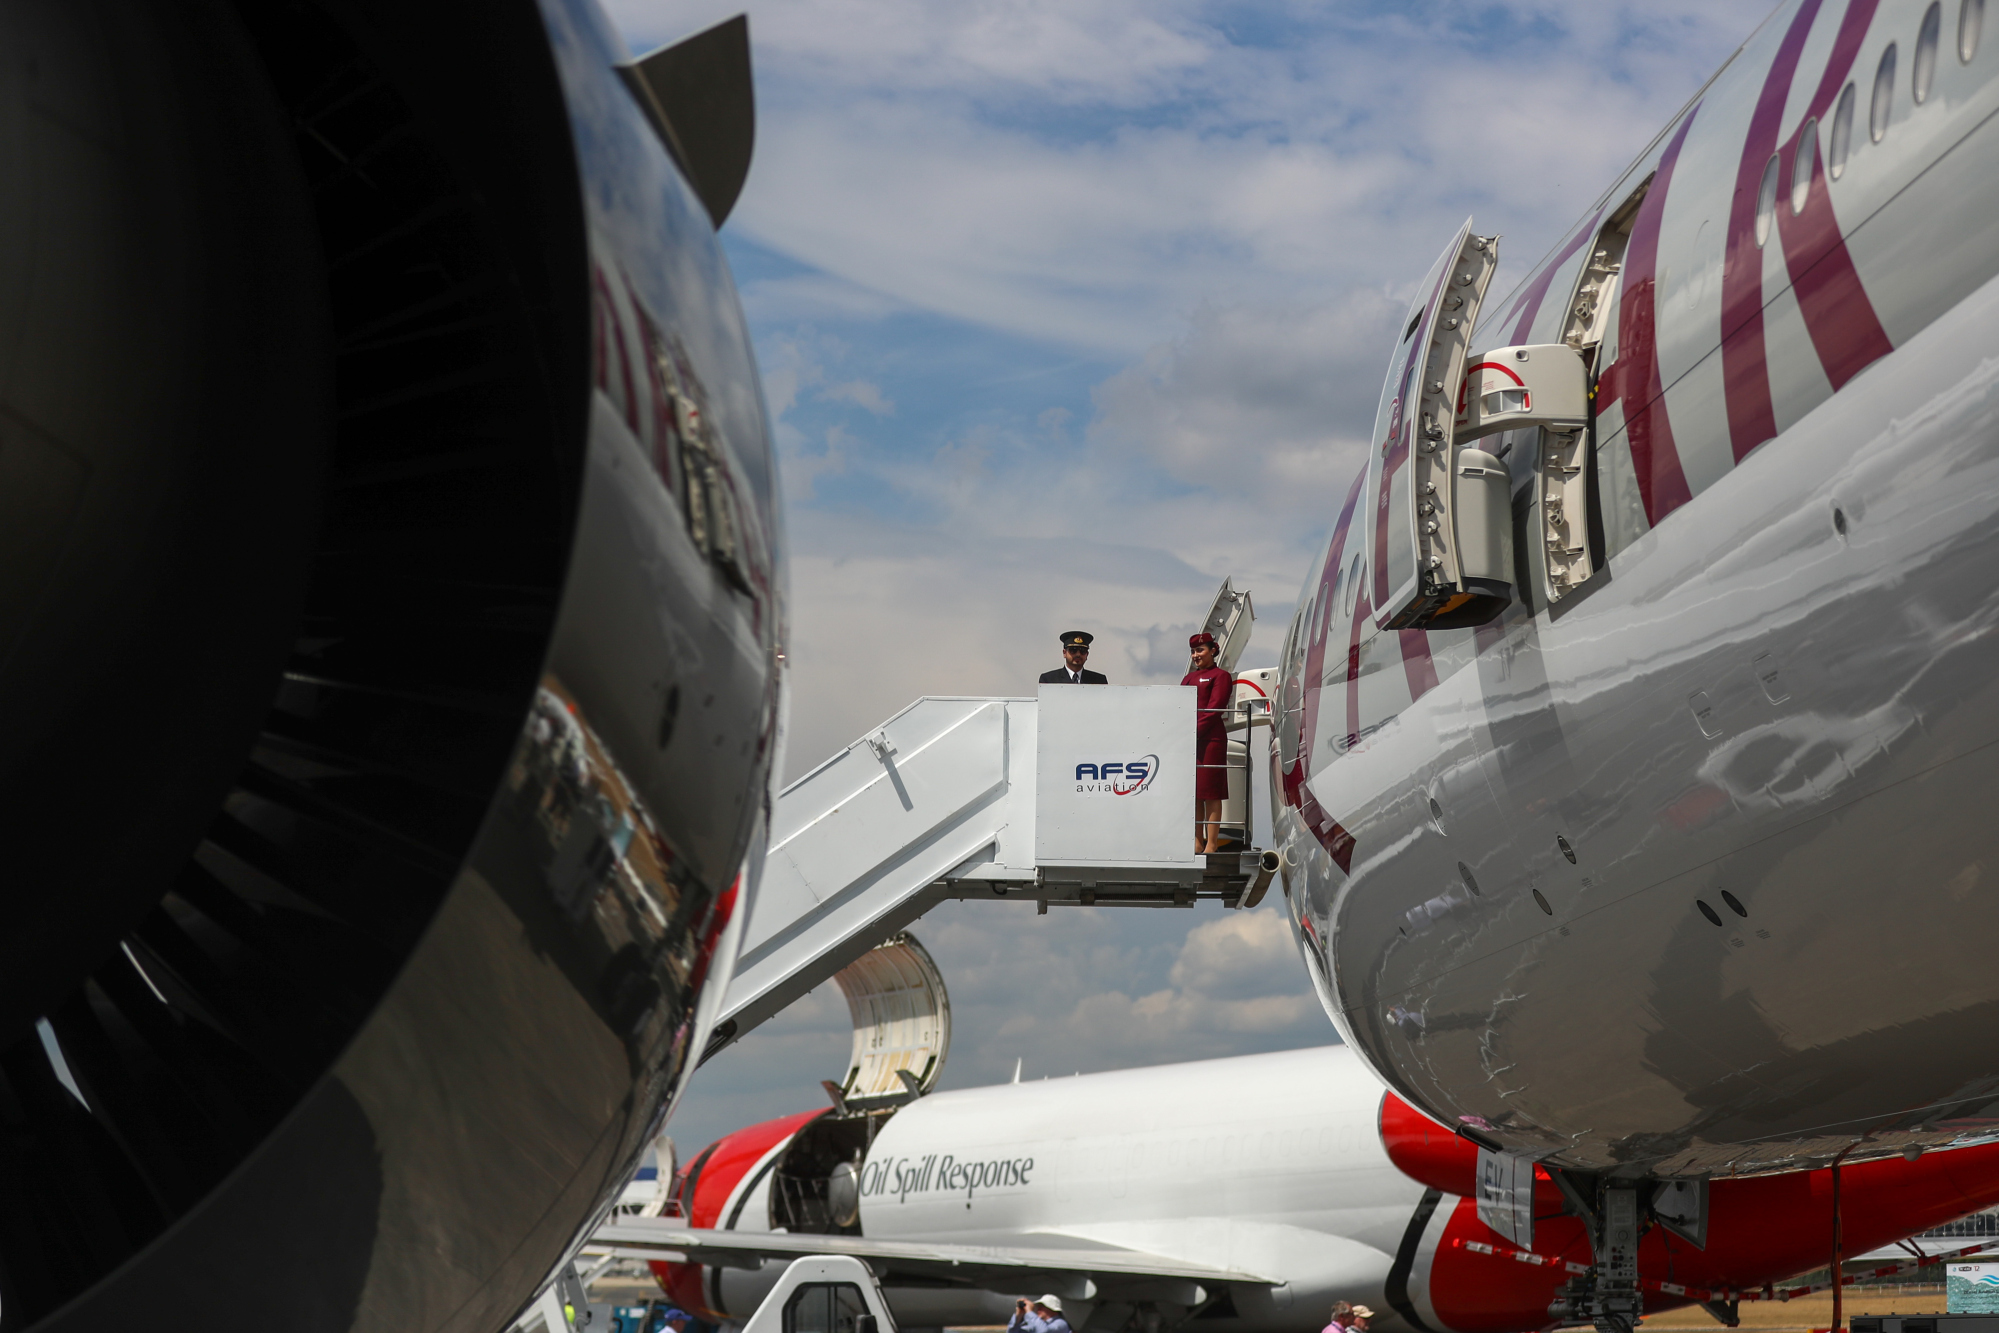 Aircrew stand at the top of steps at the entrance to a Qatar Airways&nbsp;Airbus A350 passenger aircraft at the Farnborough International Airshow in Farnborough, U.K., in 2018.&nbsp;